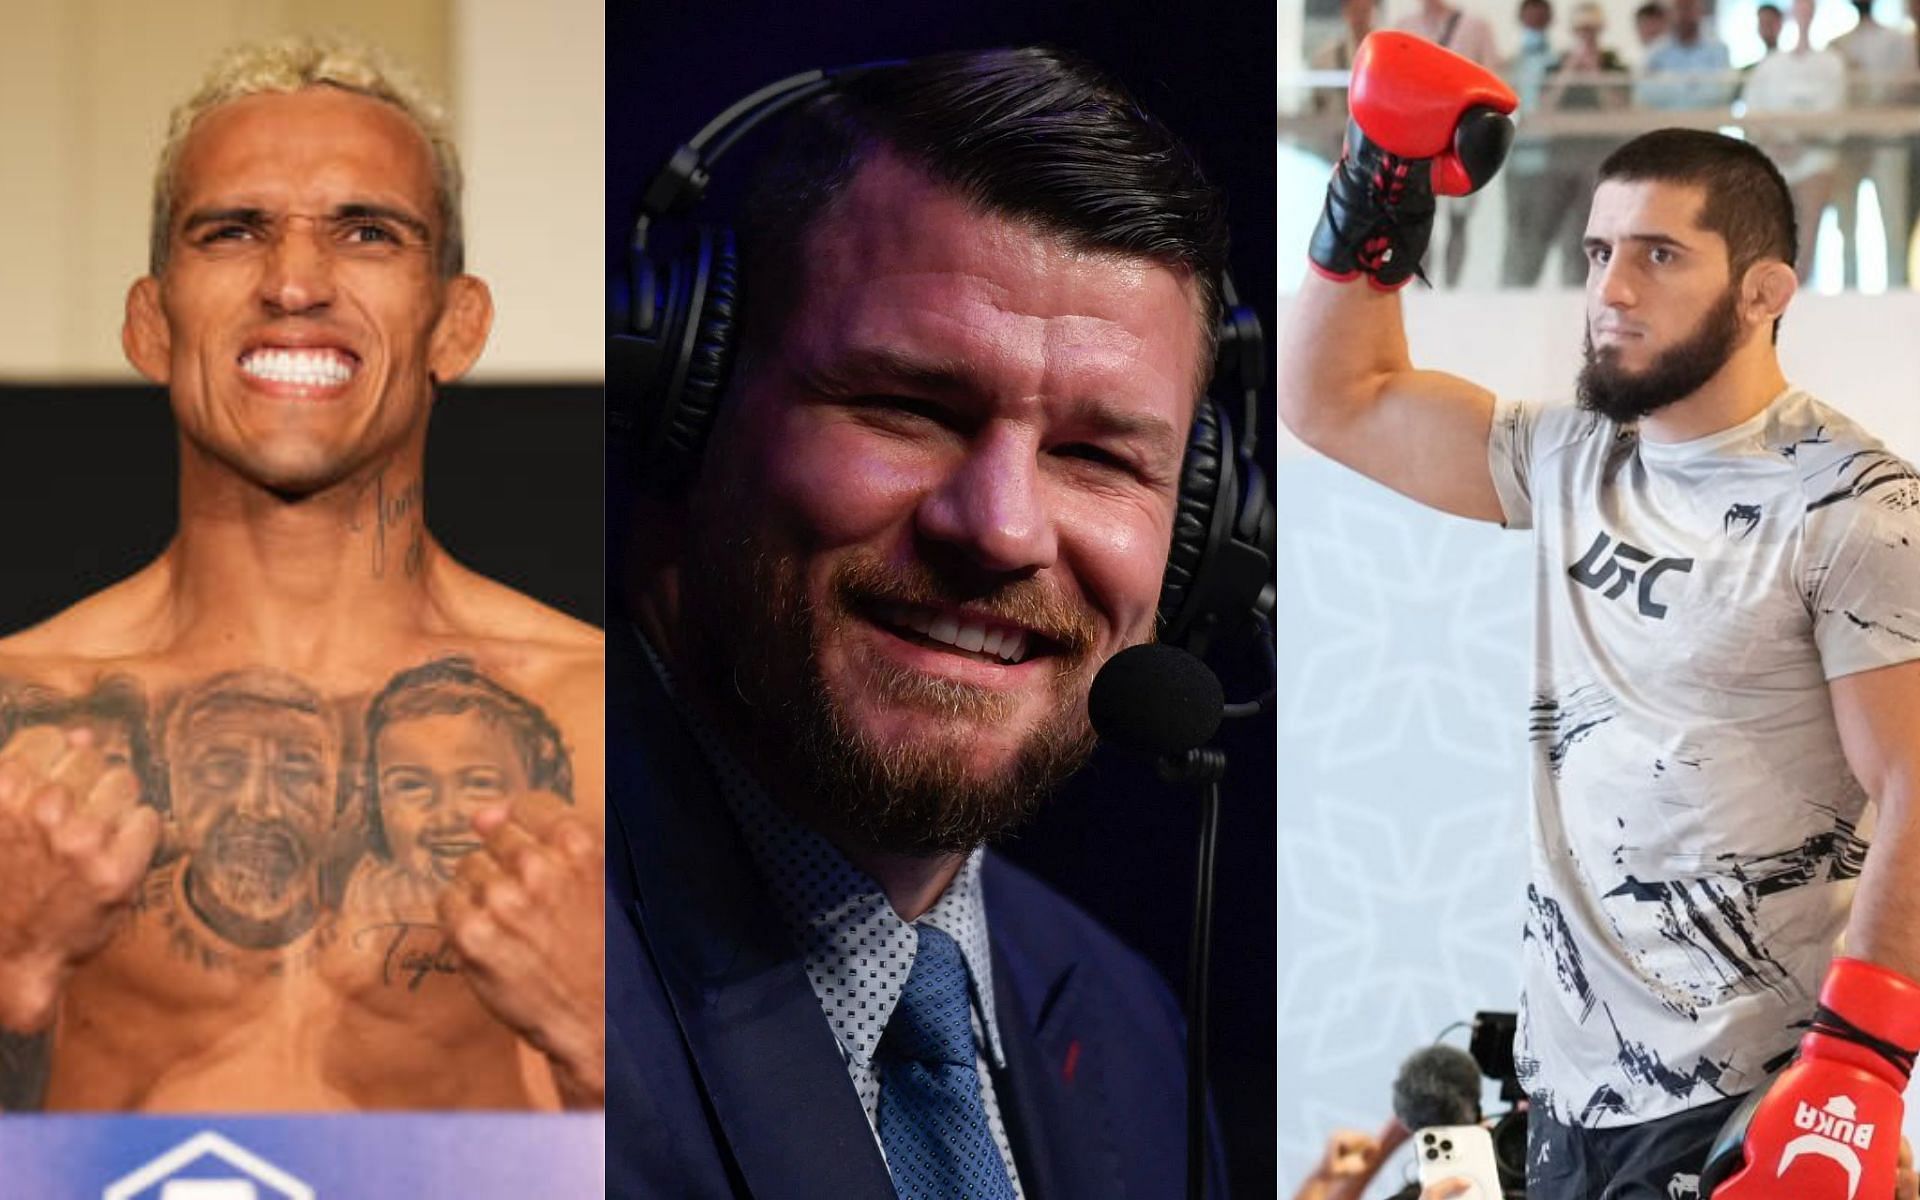 Charles Oliveira (left), Michael Bisping (middle) and Islam Makhachev (right)